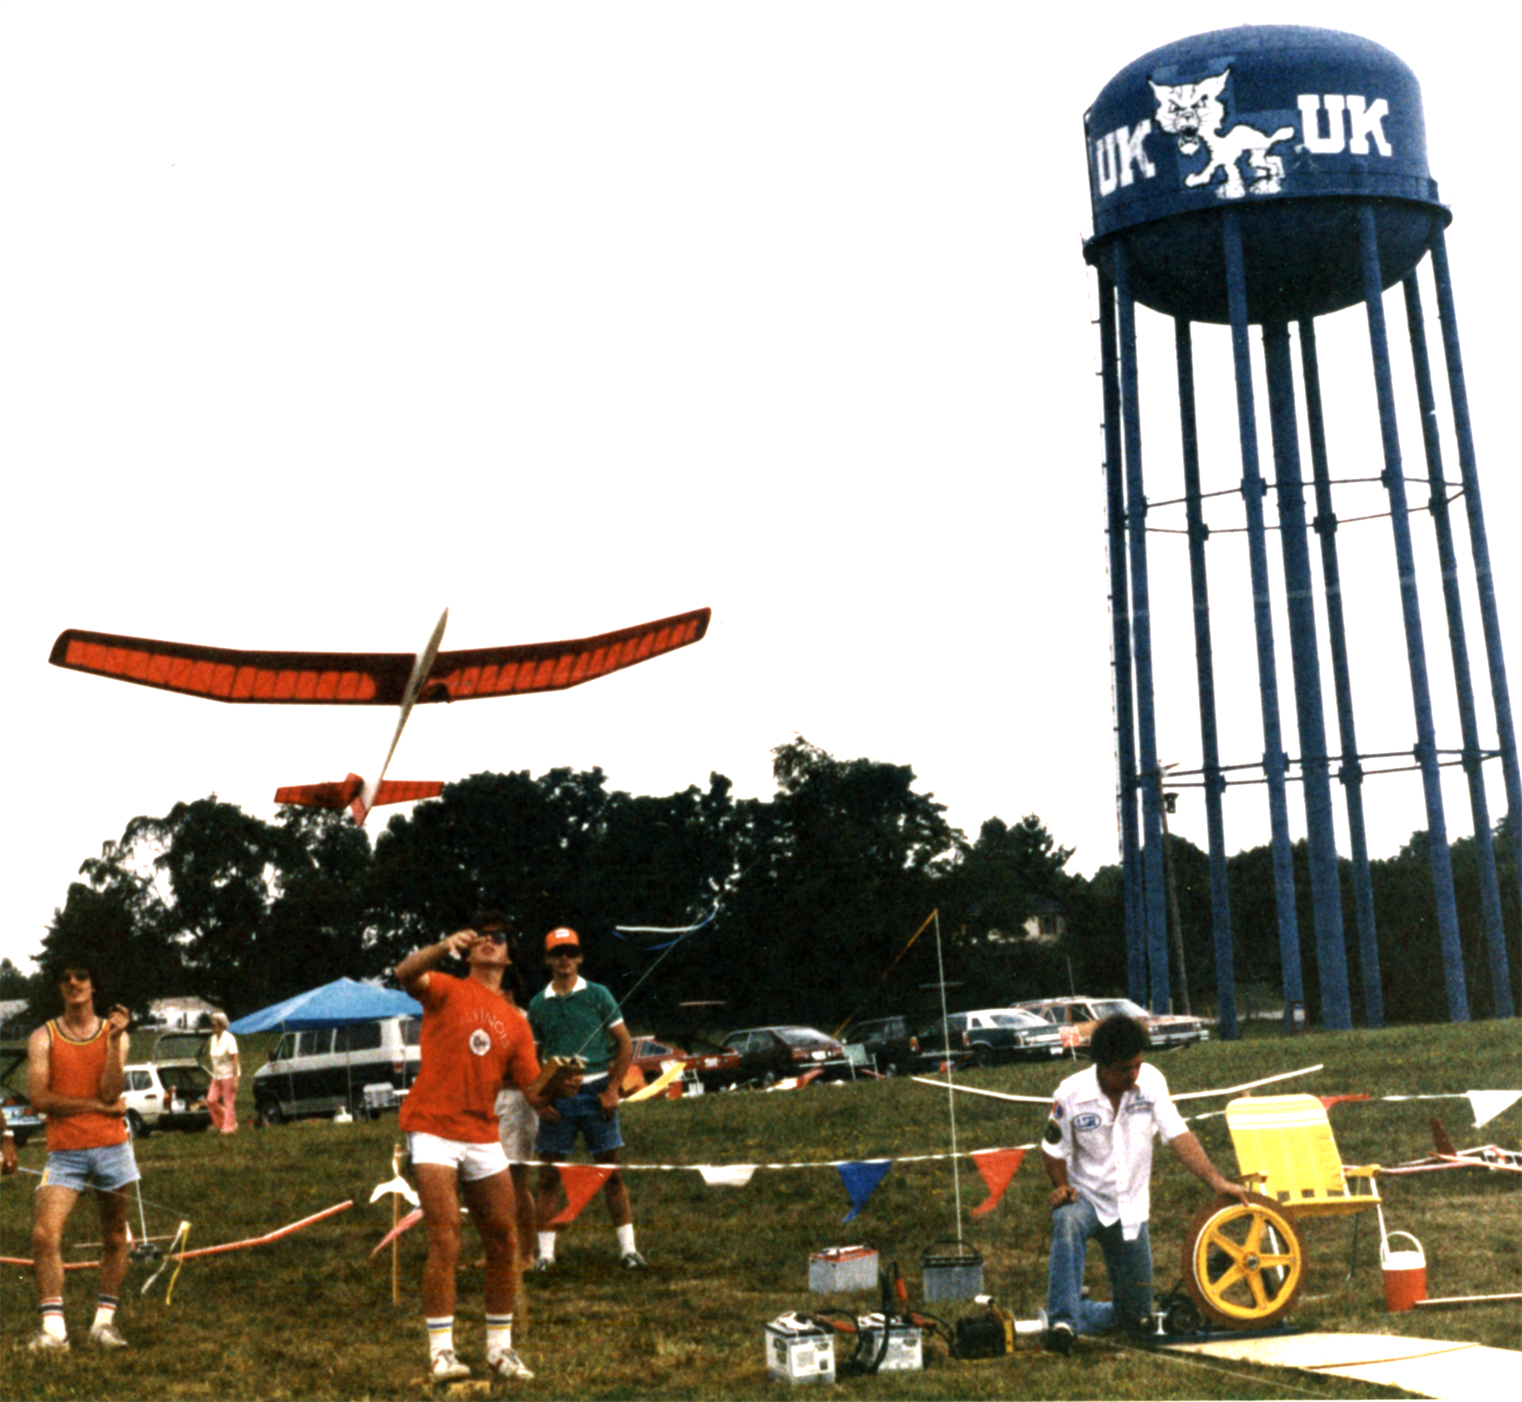 Photo from the early 1980s of Michael Selig winch launching his Airtronics Sagitta 900 at an RC sailplane contest at the University of Kentucky Lexington. The person on the right is managing the winch line that runs out to a pulley several hundred feet away and then back to the sailplane towhook. Selig is operating the winch with a foot pedal.